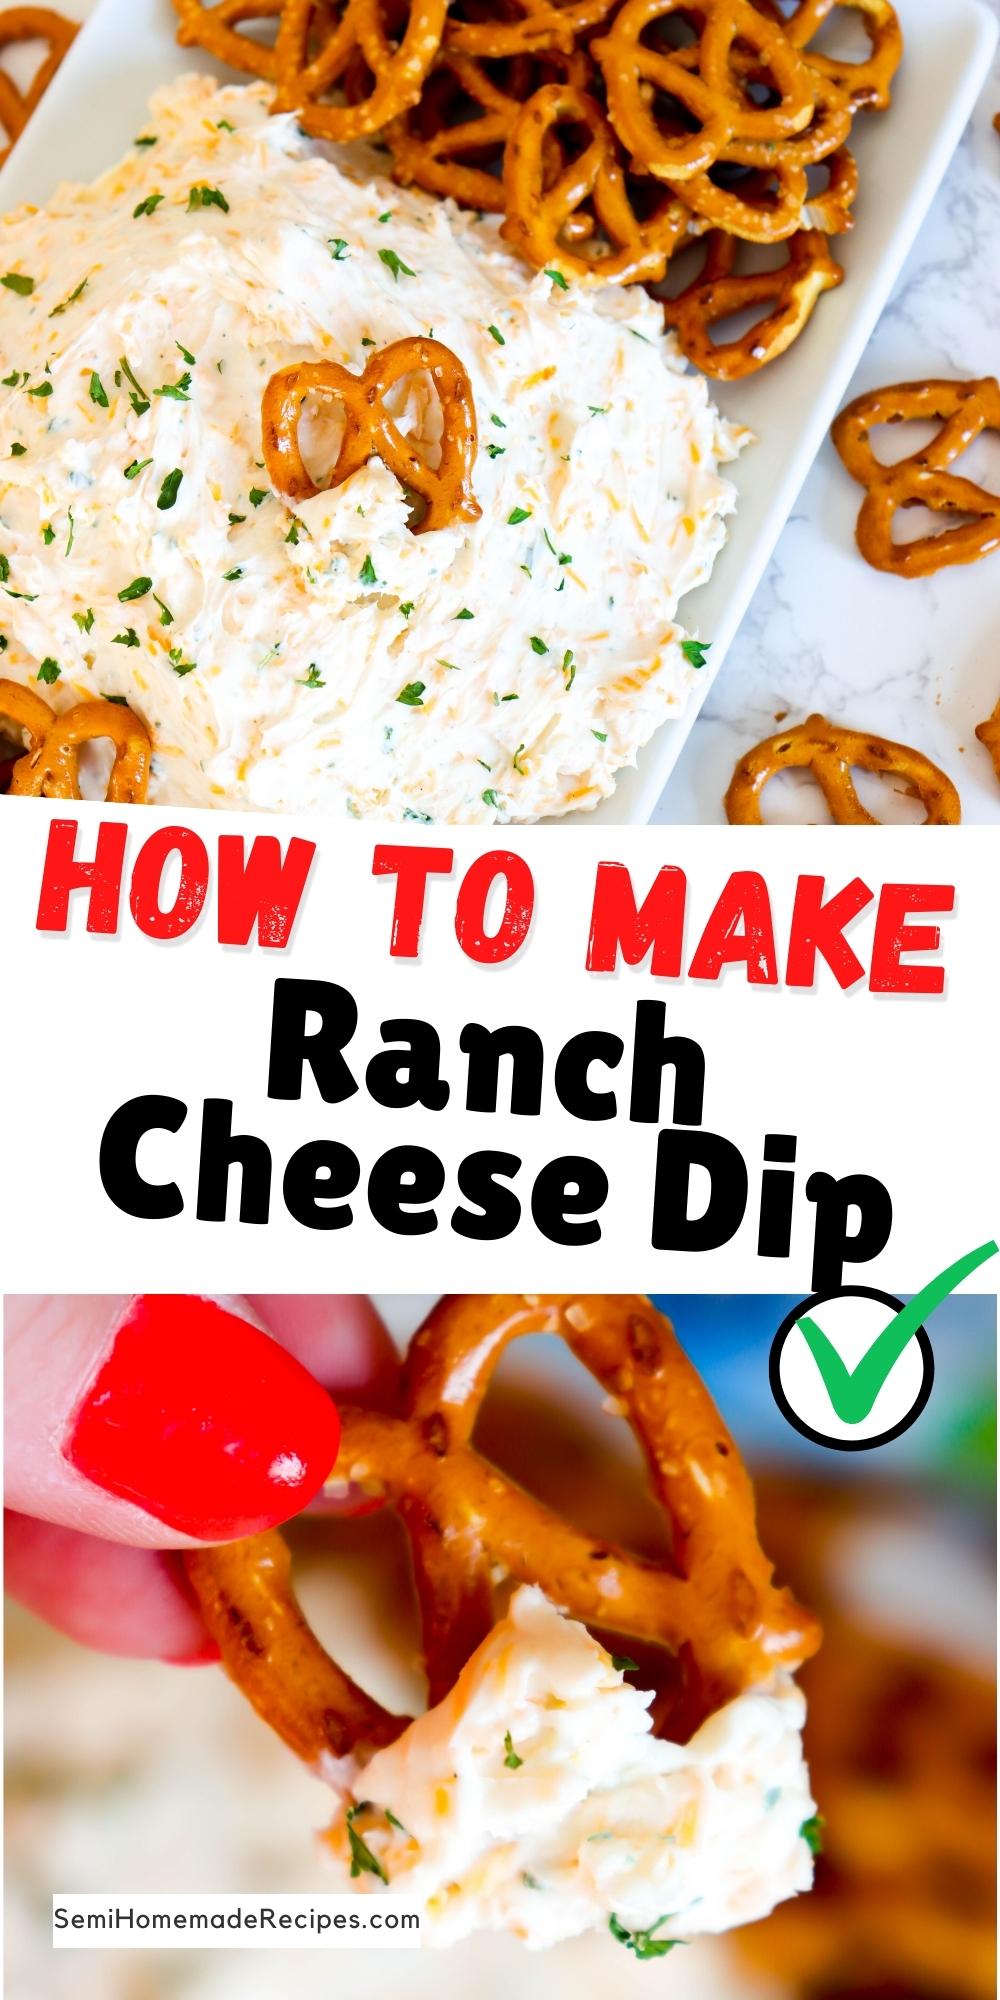 Ranch Cheese Dip - A cheesy, ranch flavored dip that is perfect for appetizers and parties! Super easy to make and great served with mini pretzels, carrots, or chips! 